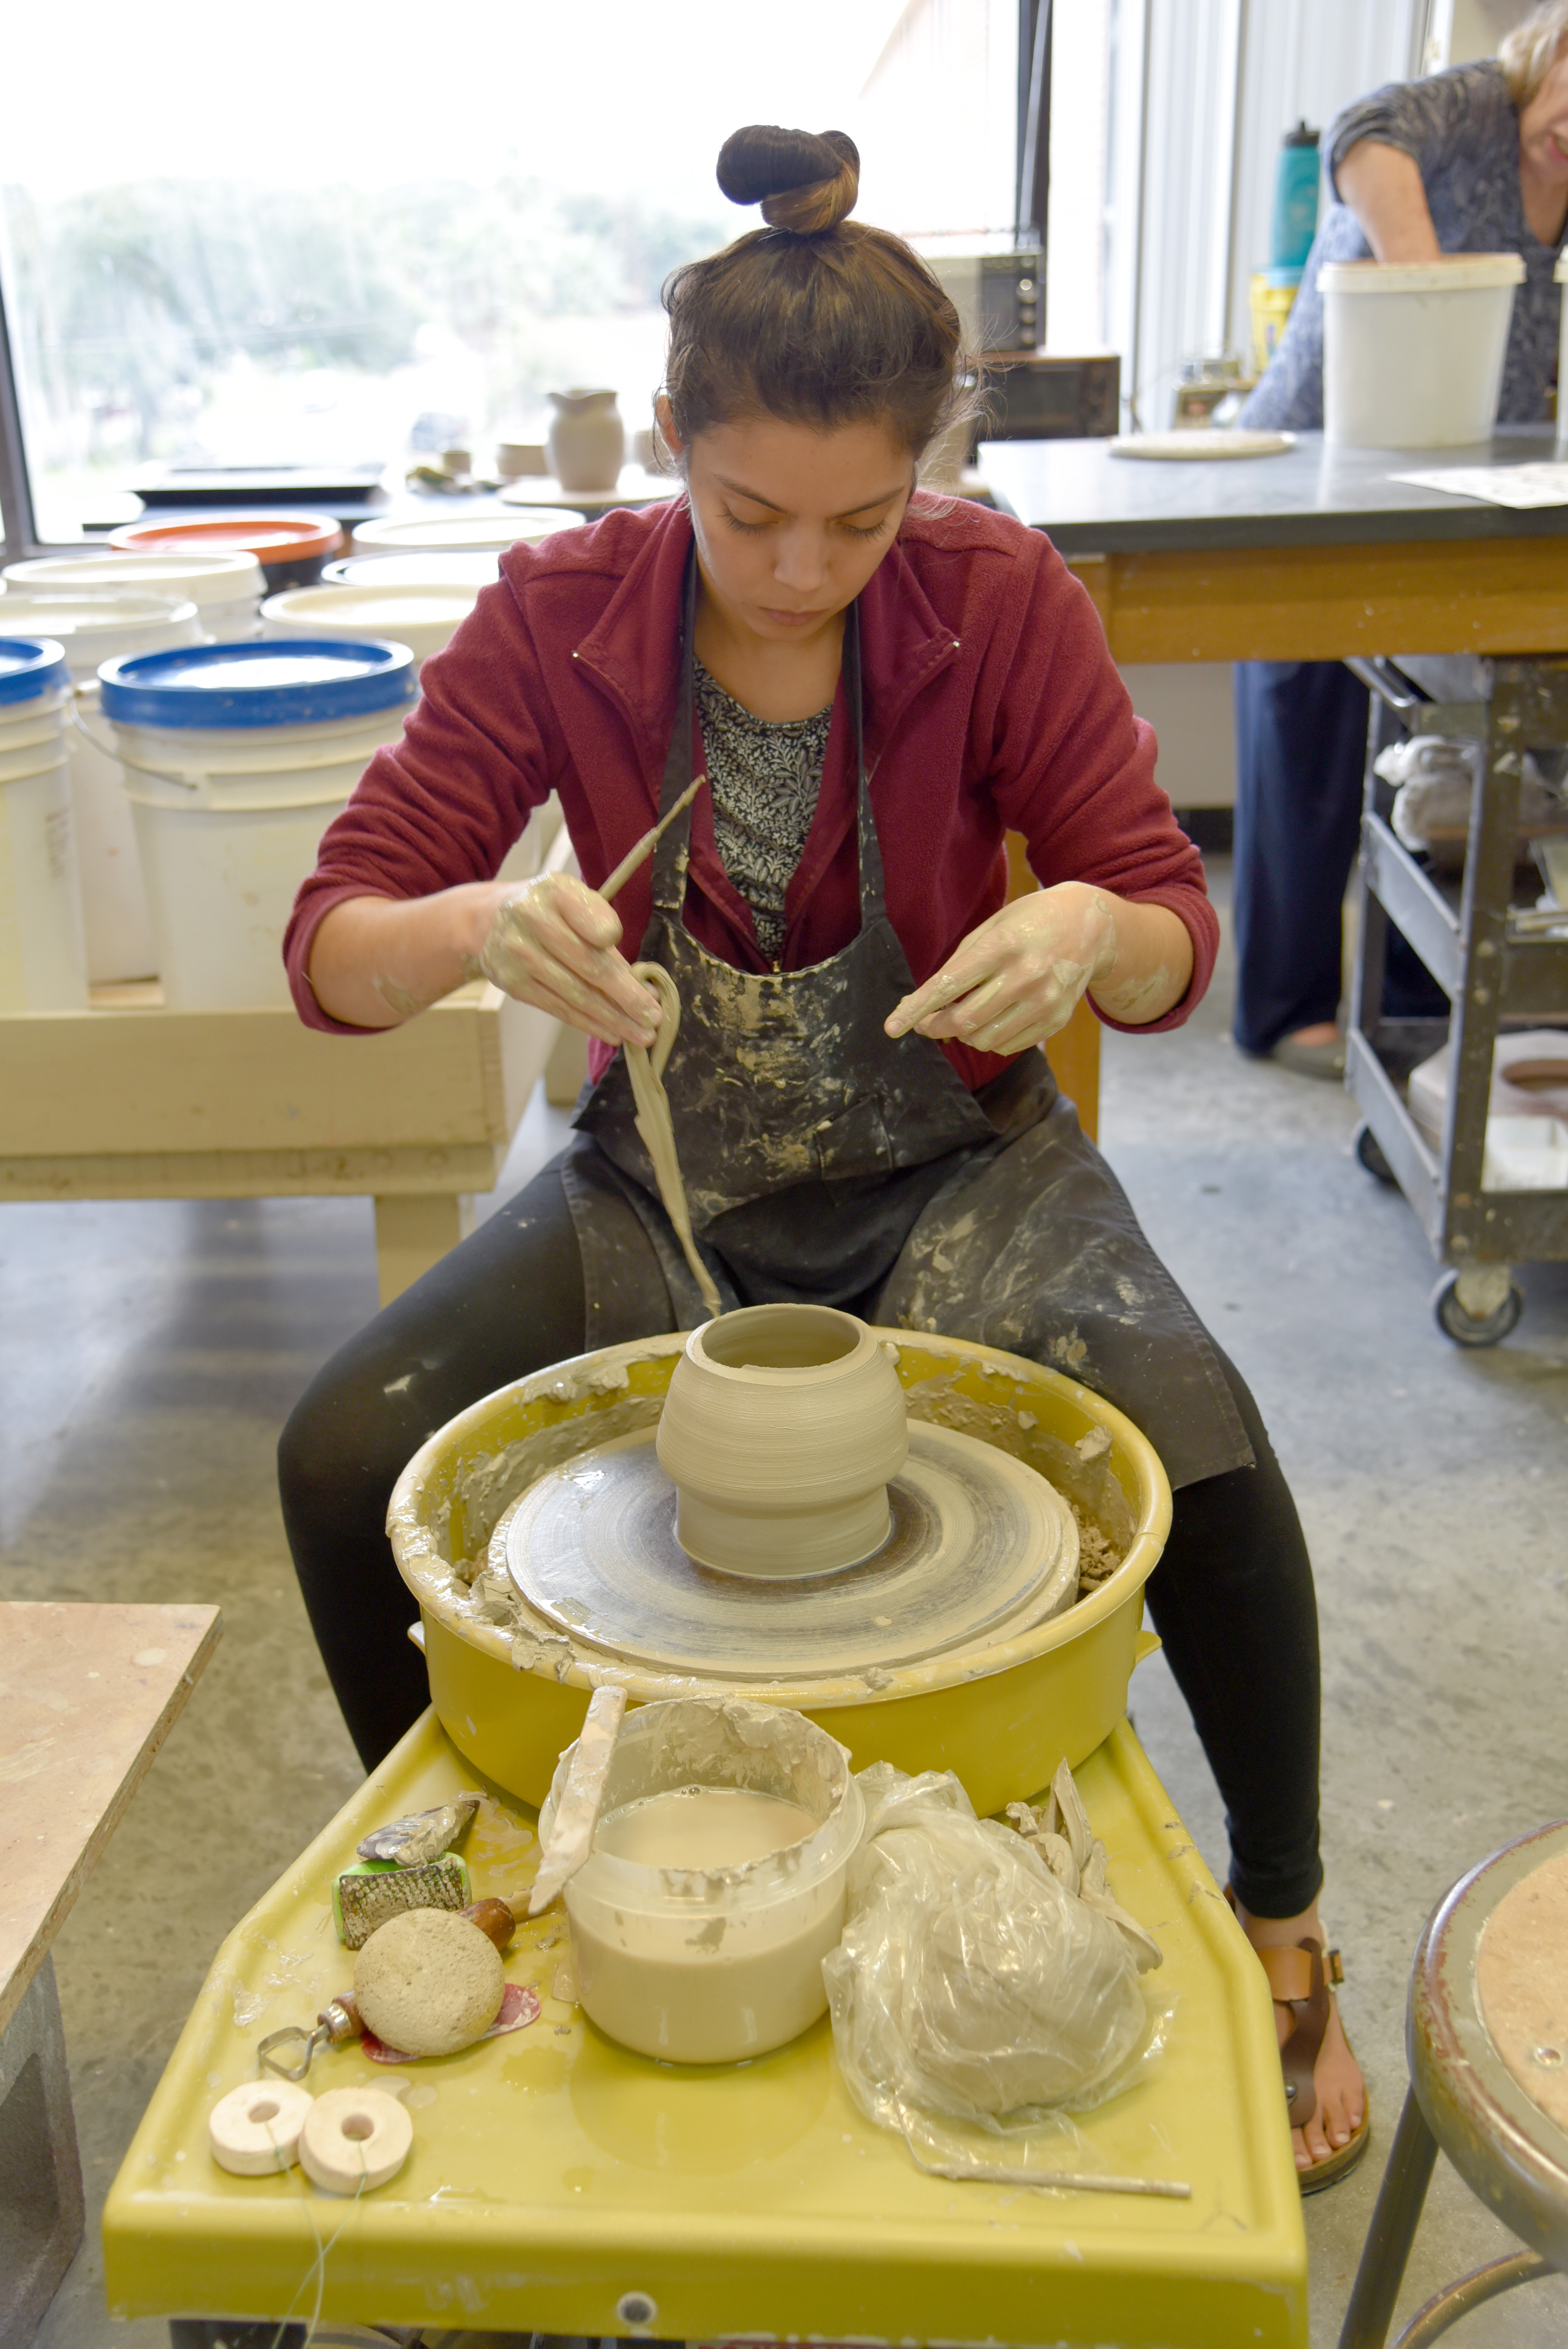 Student and pottery wheel;